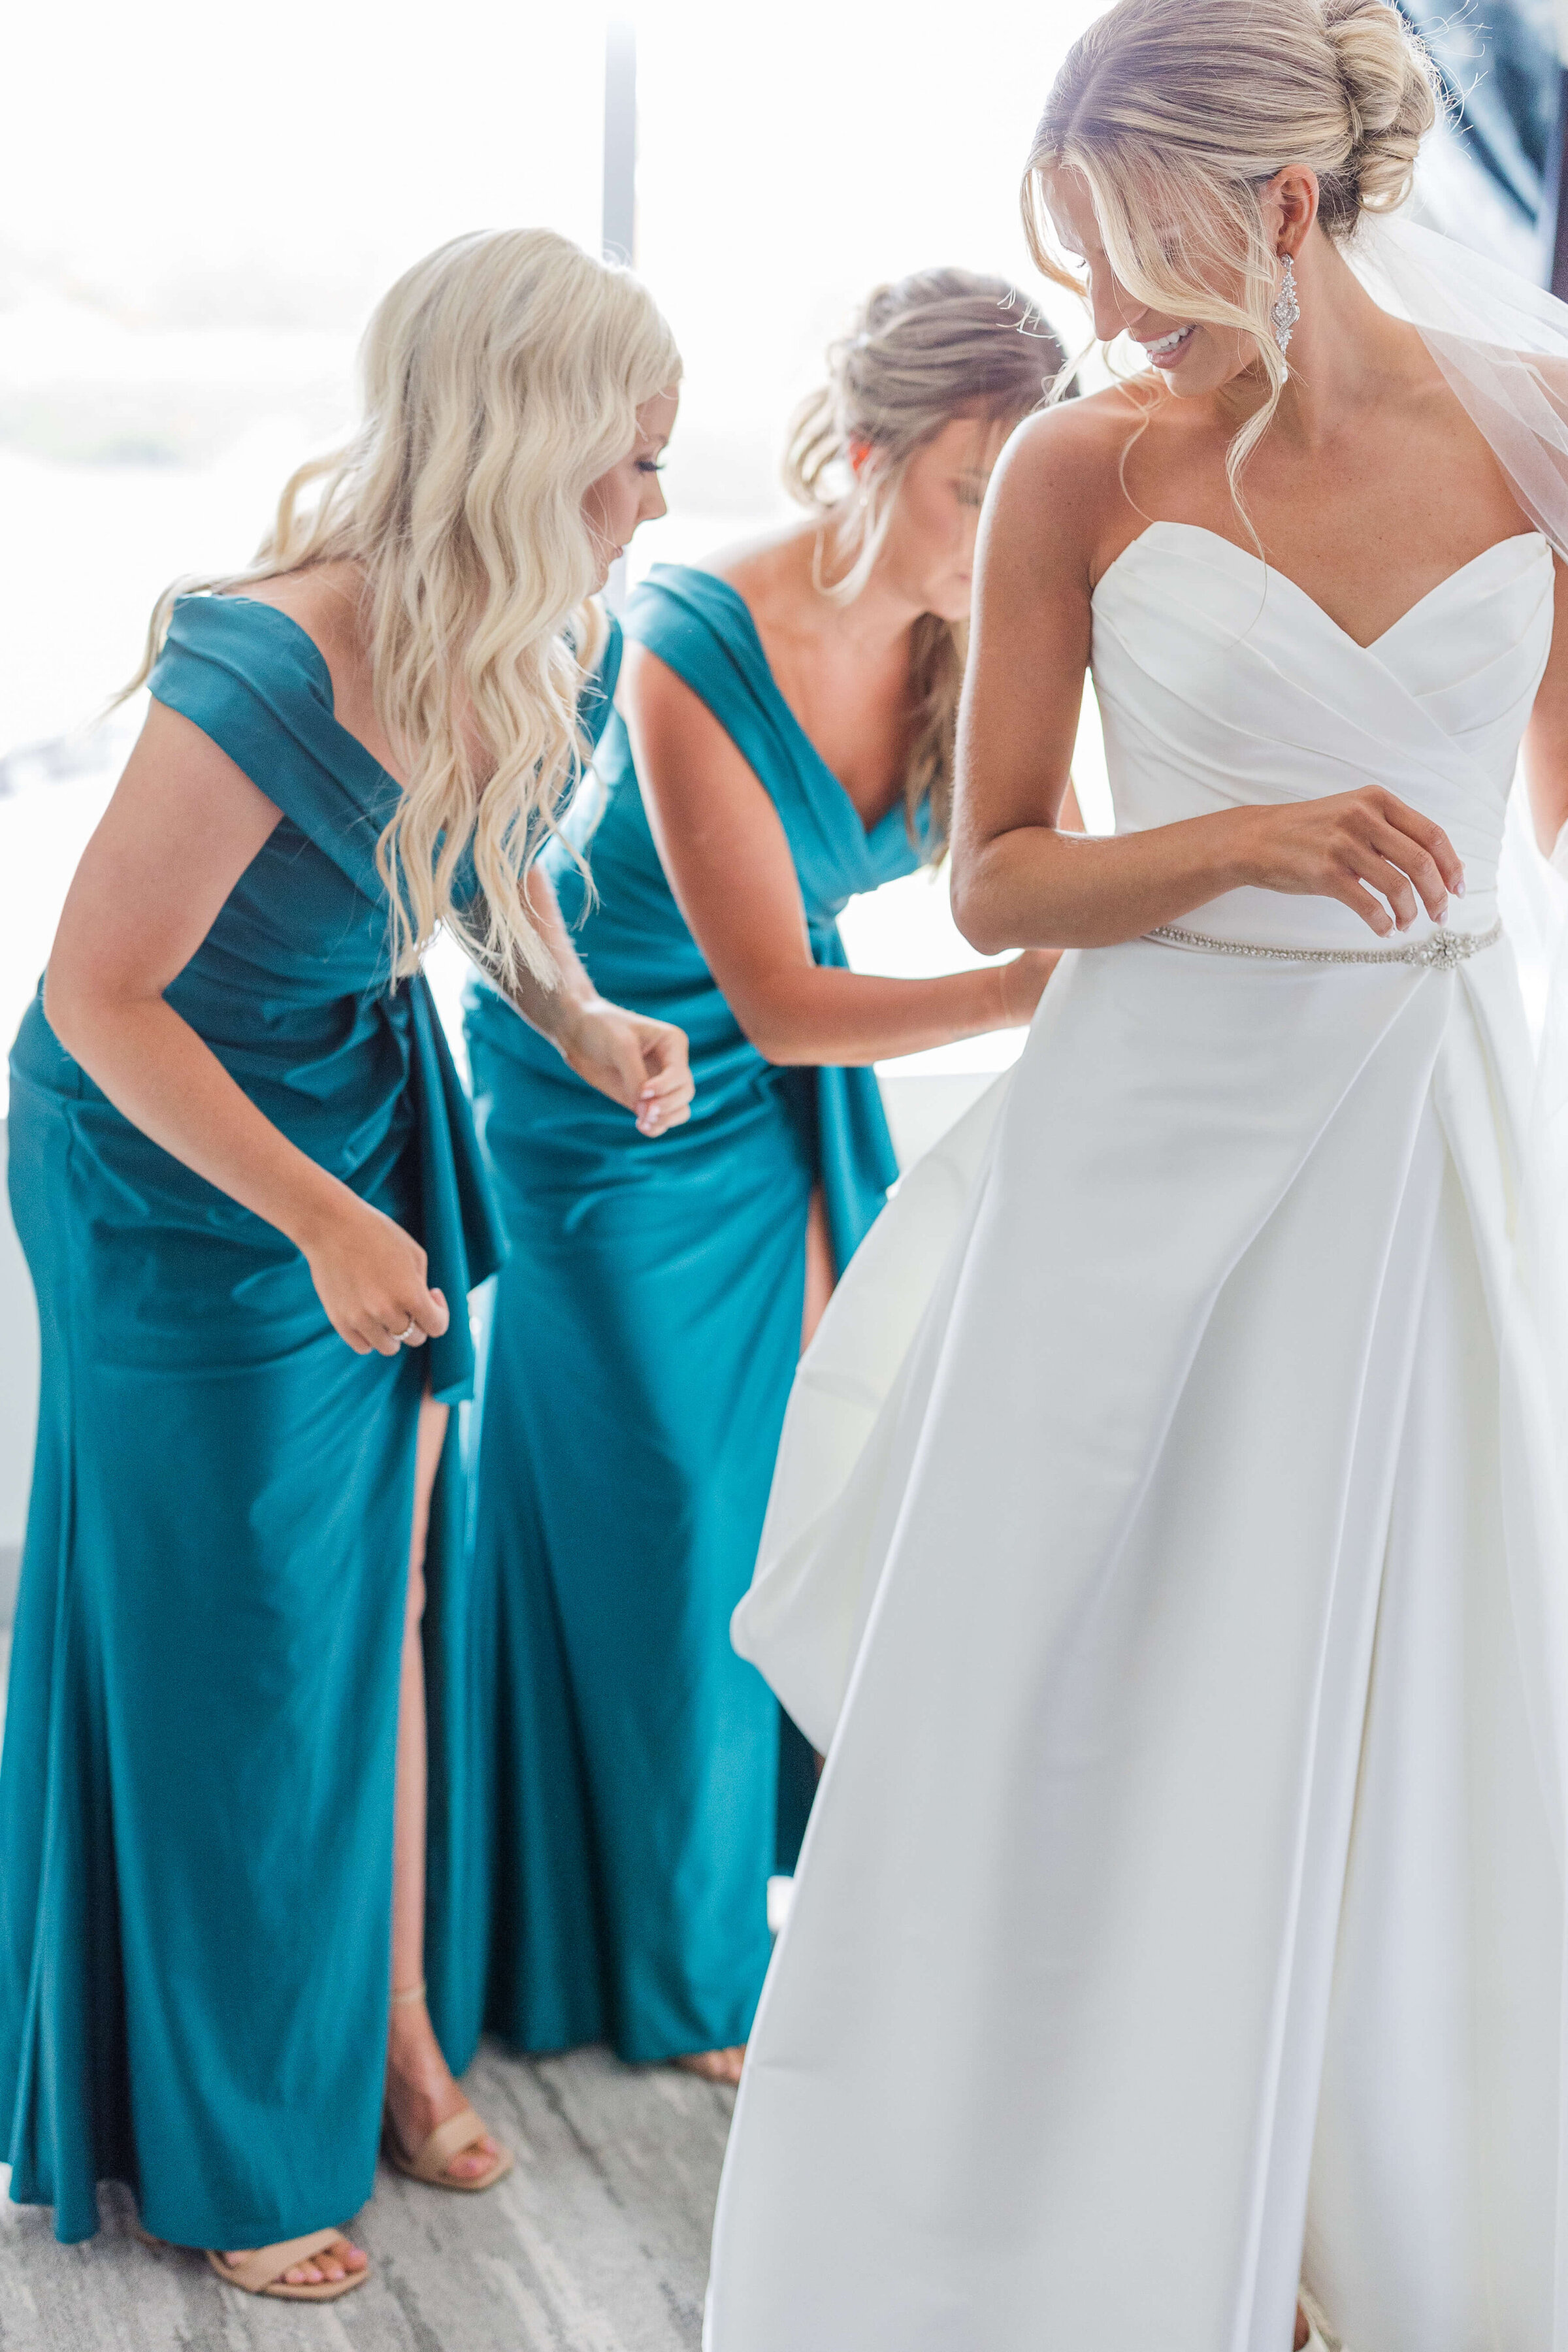 A bride stands with her bridesmaids as they help her with her dress. She's smiling and looking back at them. They are in teal dresses.